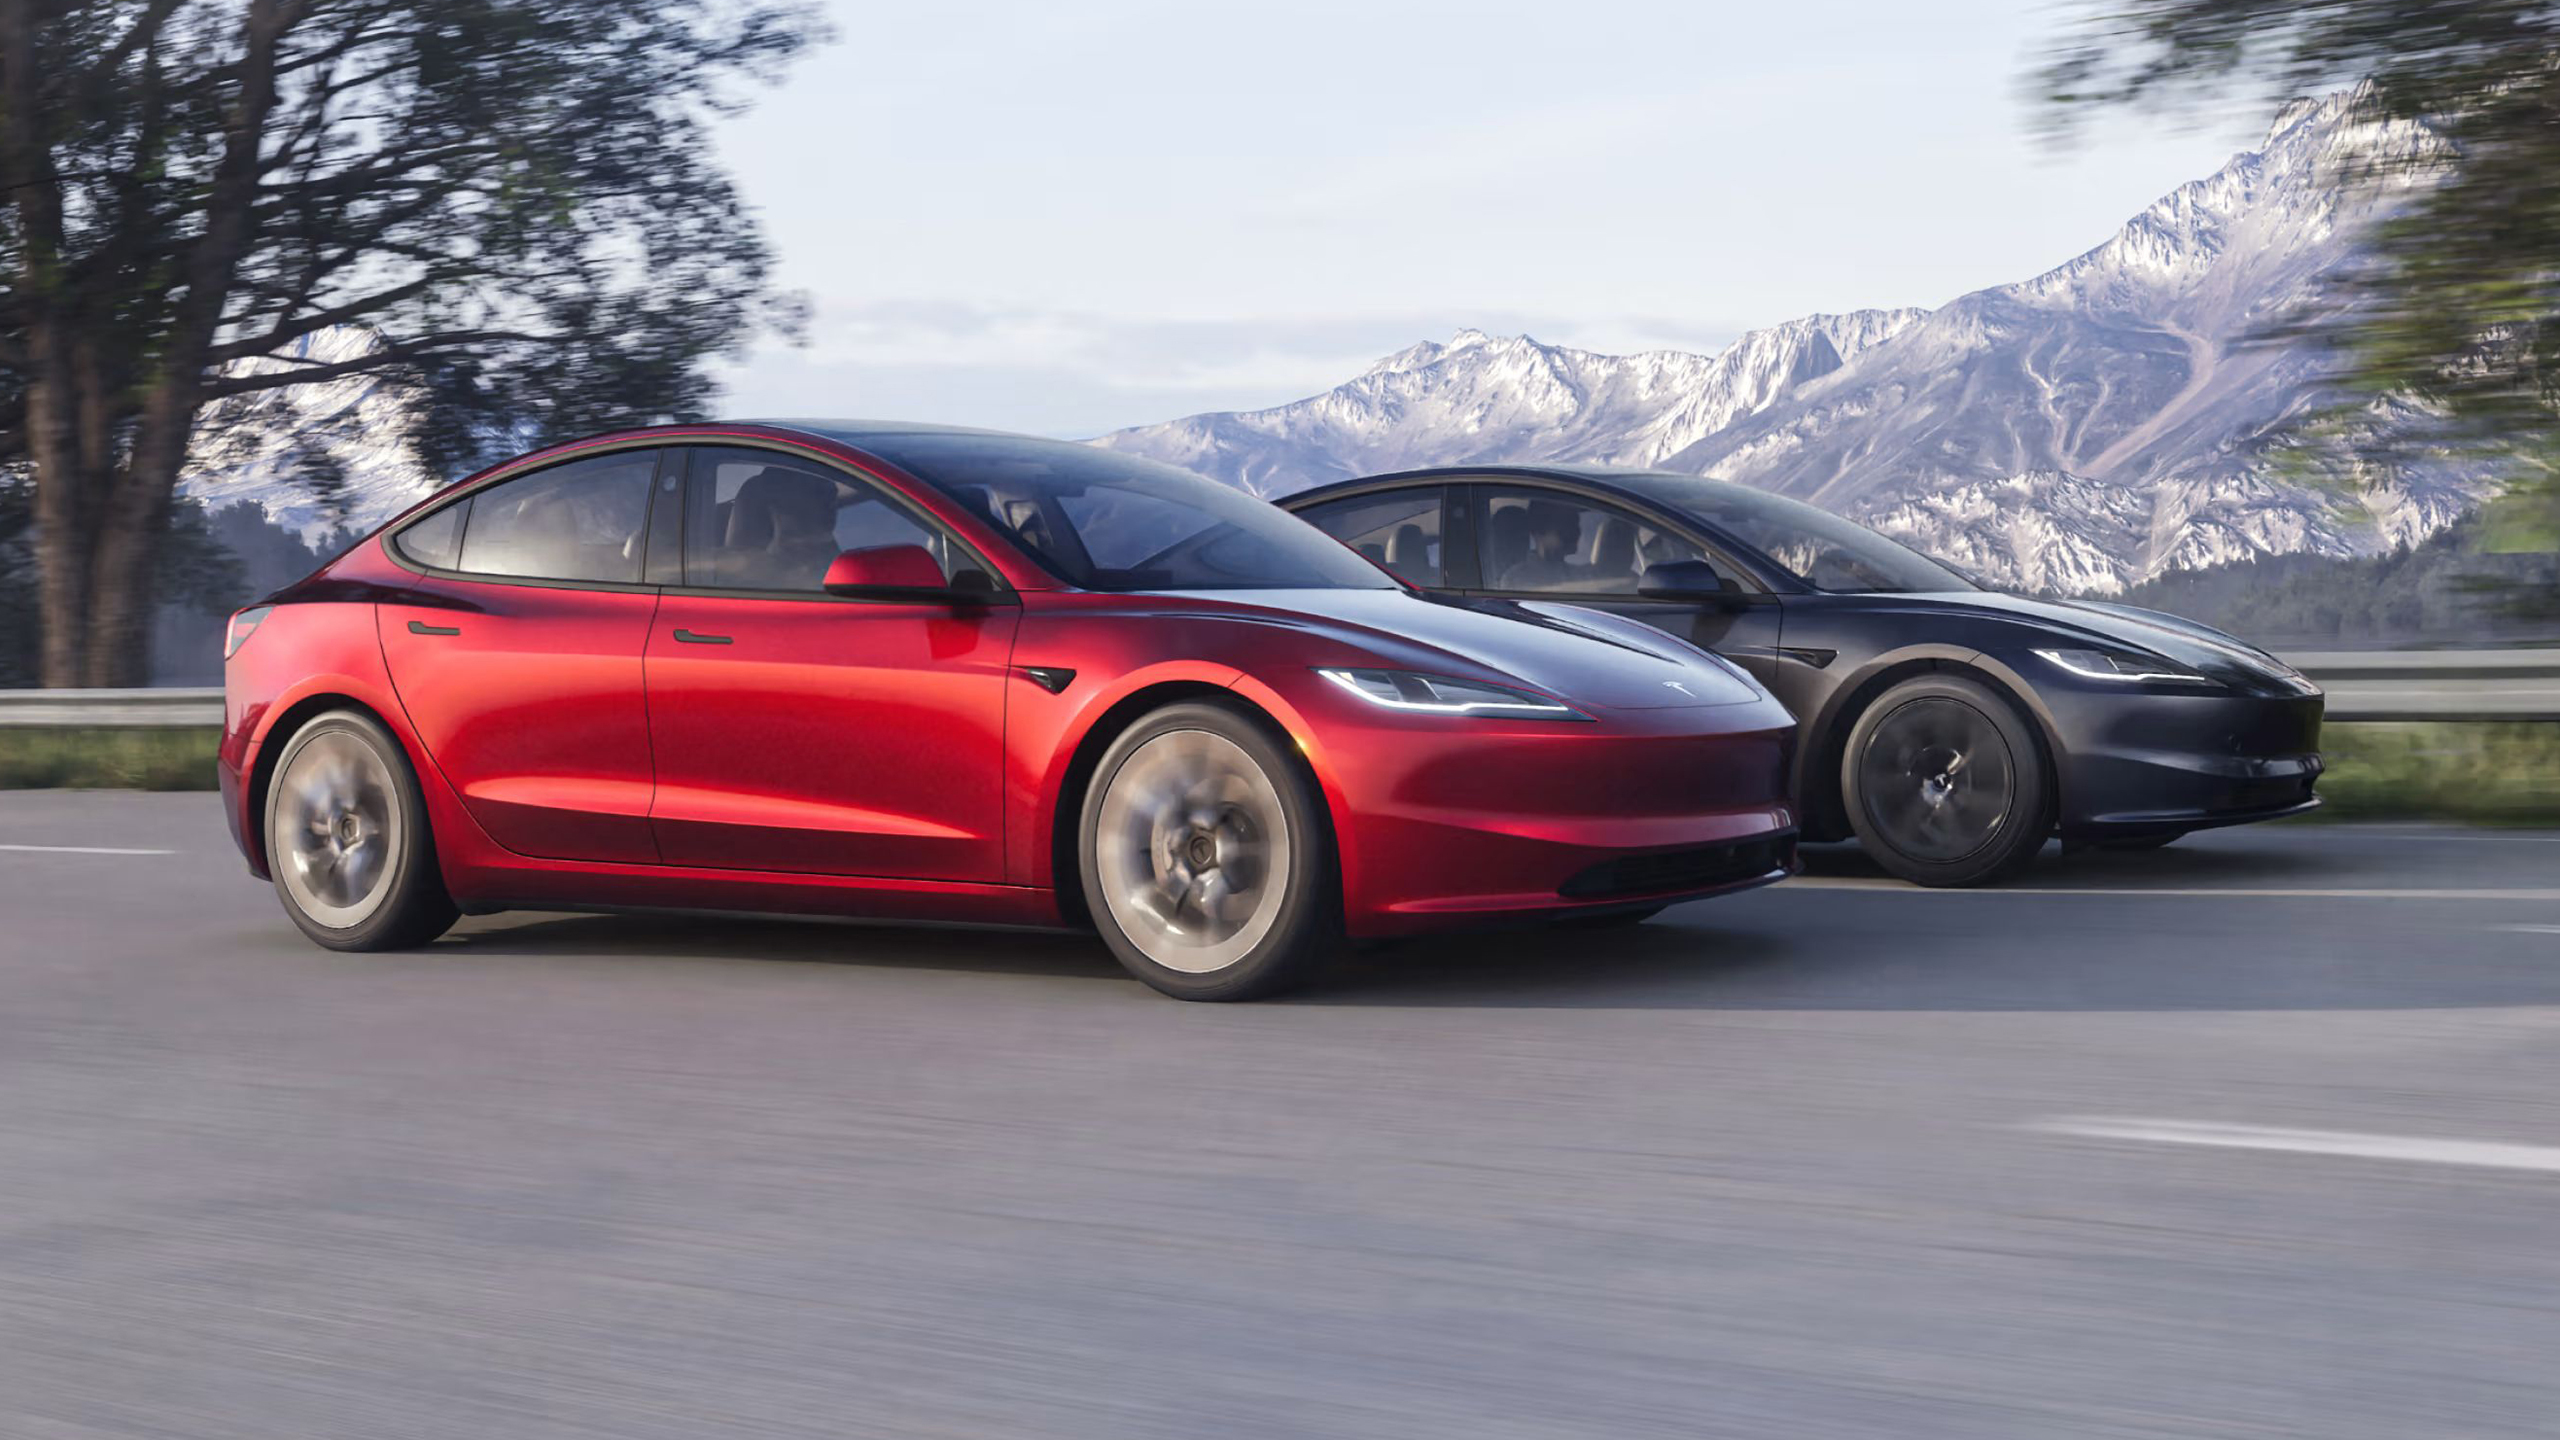 New Tesla Model 3 goes further on a charge, gets higher-quality